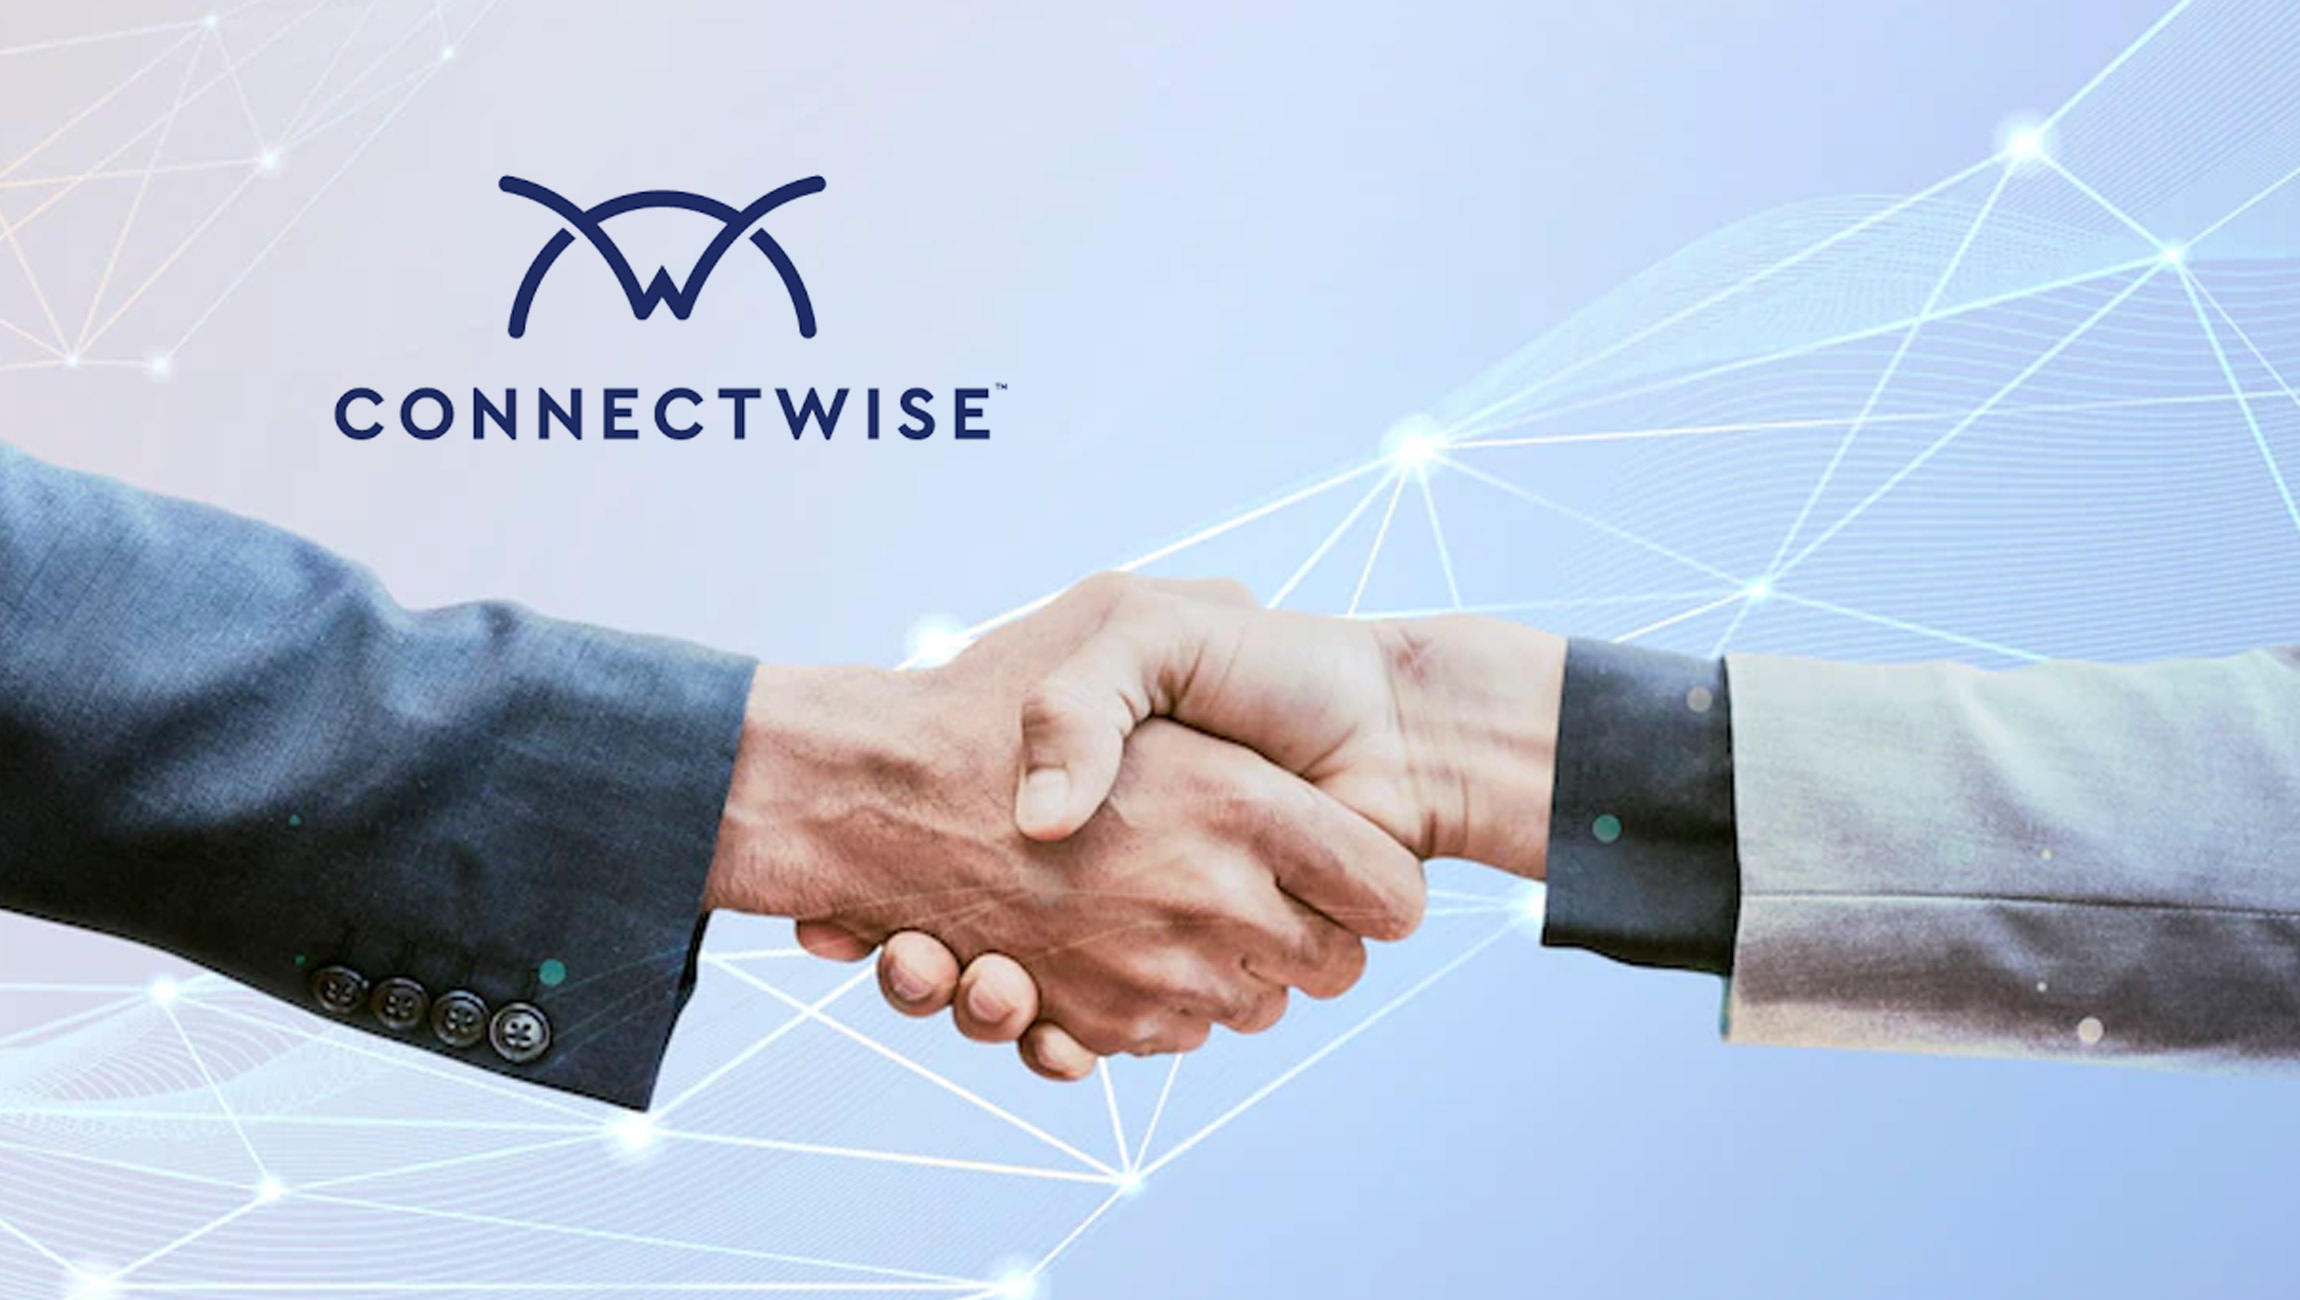 ConnectWise Expands Collaboration with Intel to Further Strengthen Cybersecurity for SMBs